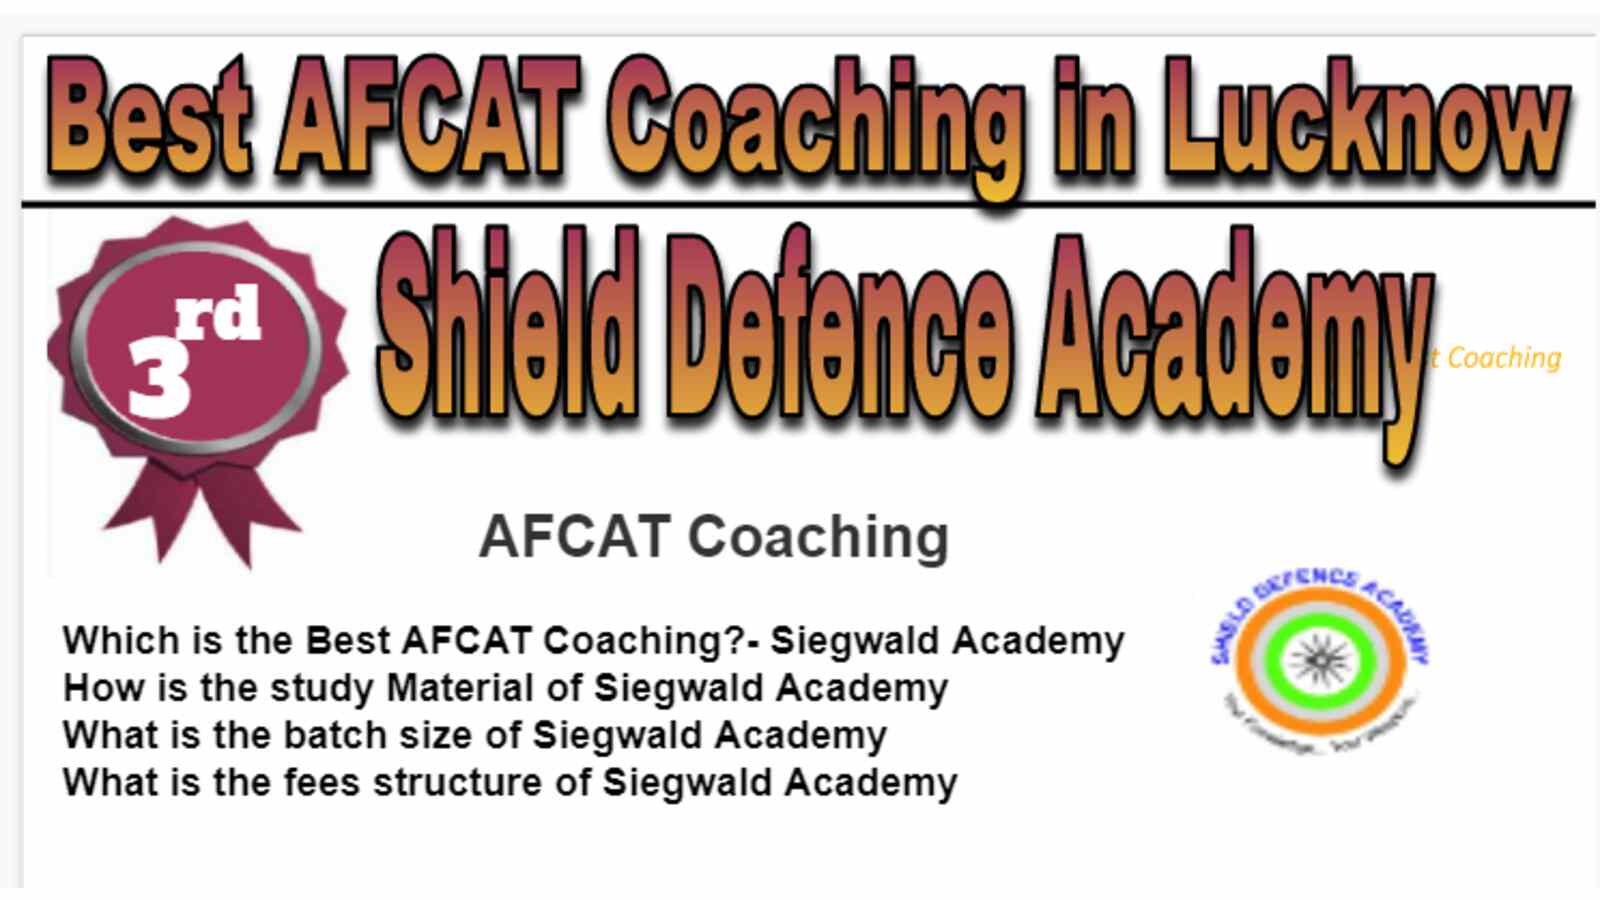 Rank 3 Best AFCAT Coaching in Lucknow